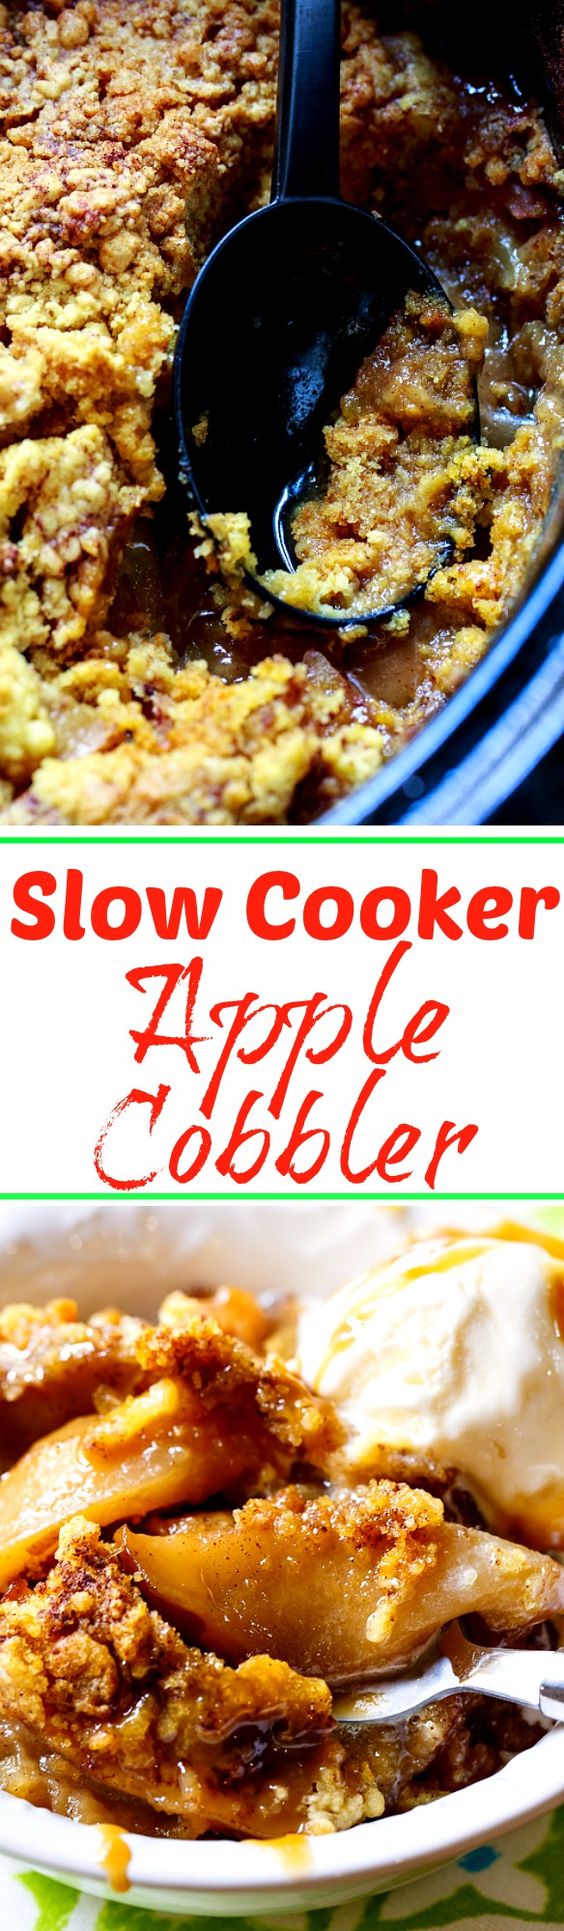 Slow Cooker Apple Cobbler. Only a few ingredients needed to make this delicious fall dessert!